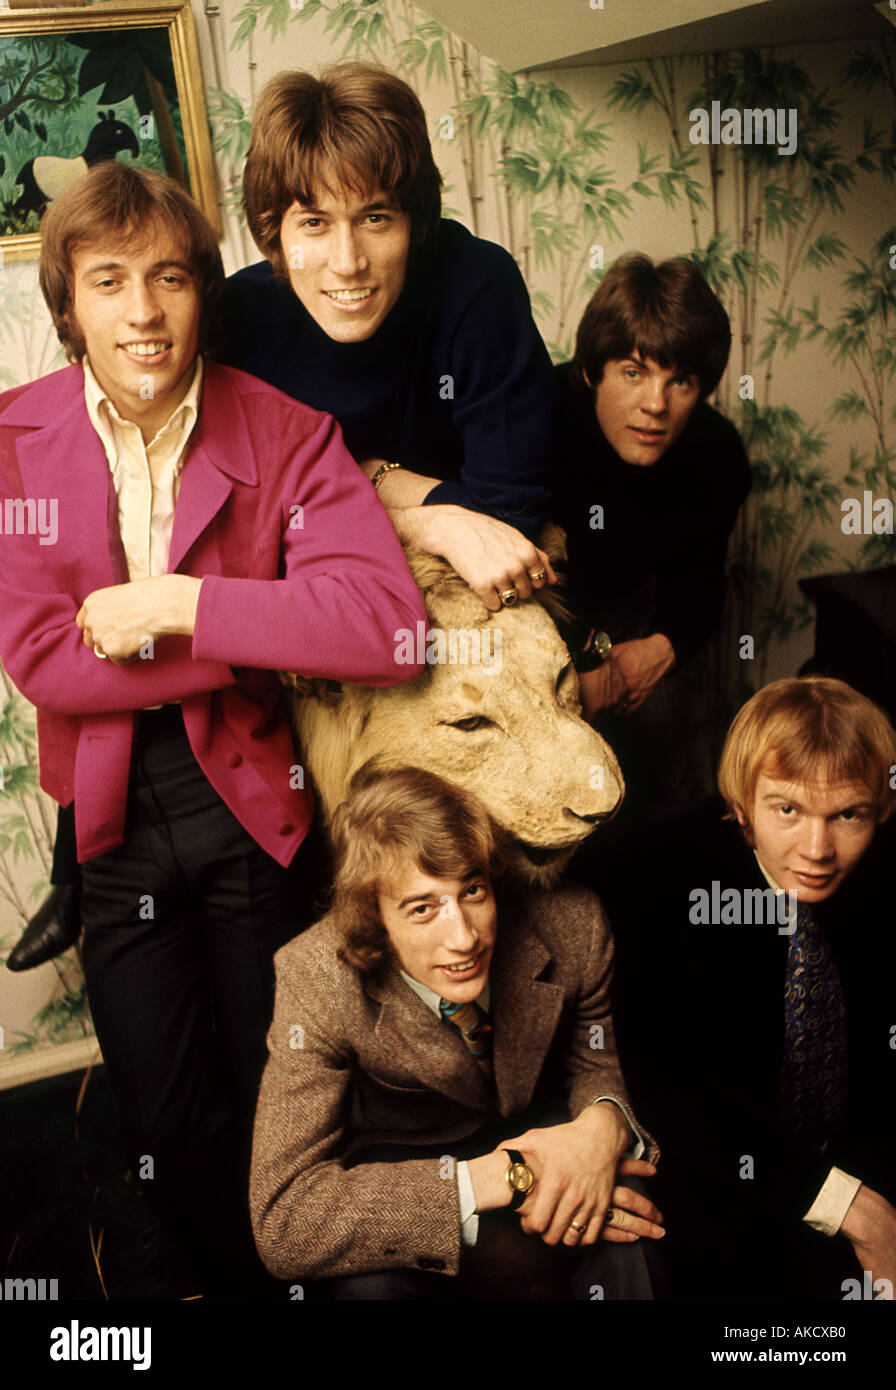 BEE GEES pop group in 1967. Photo: Tony Gale Stock Photo